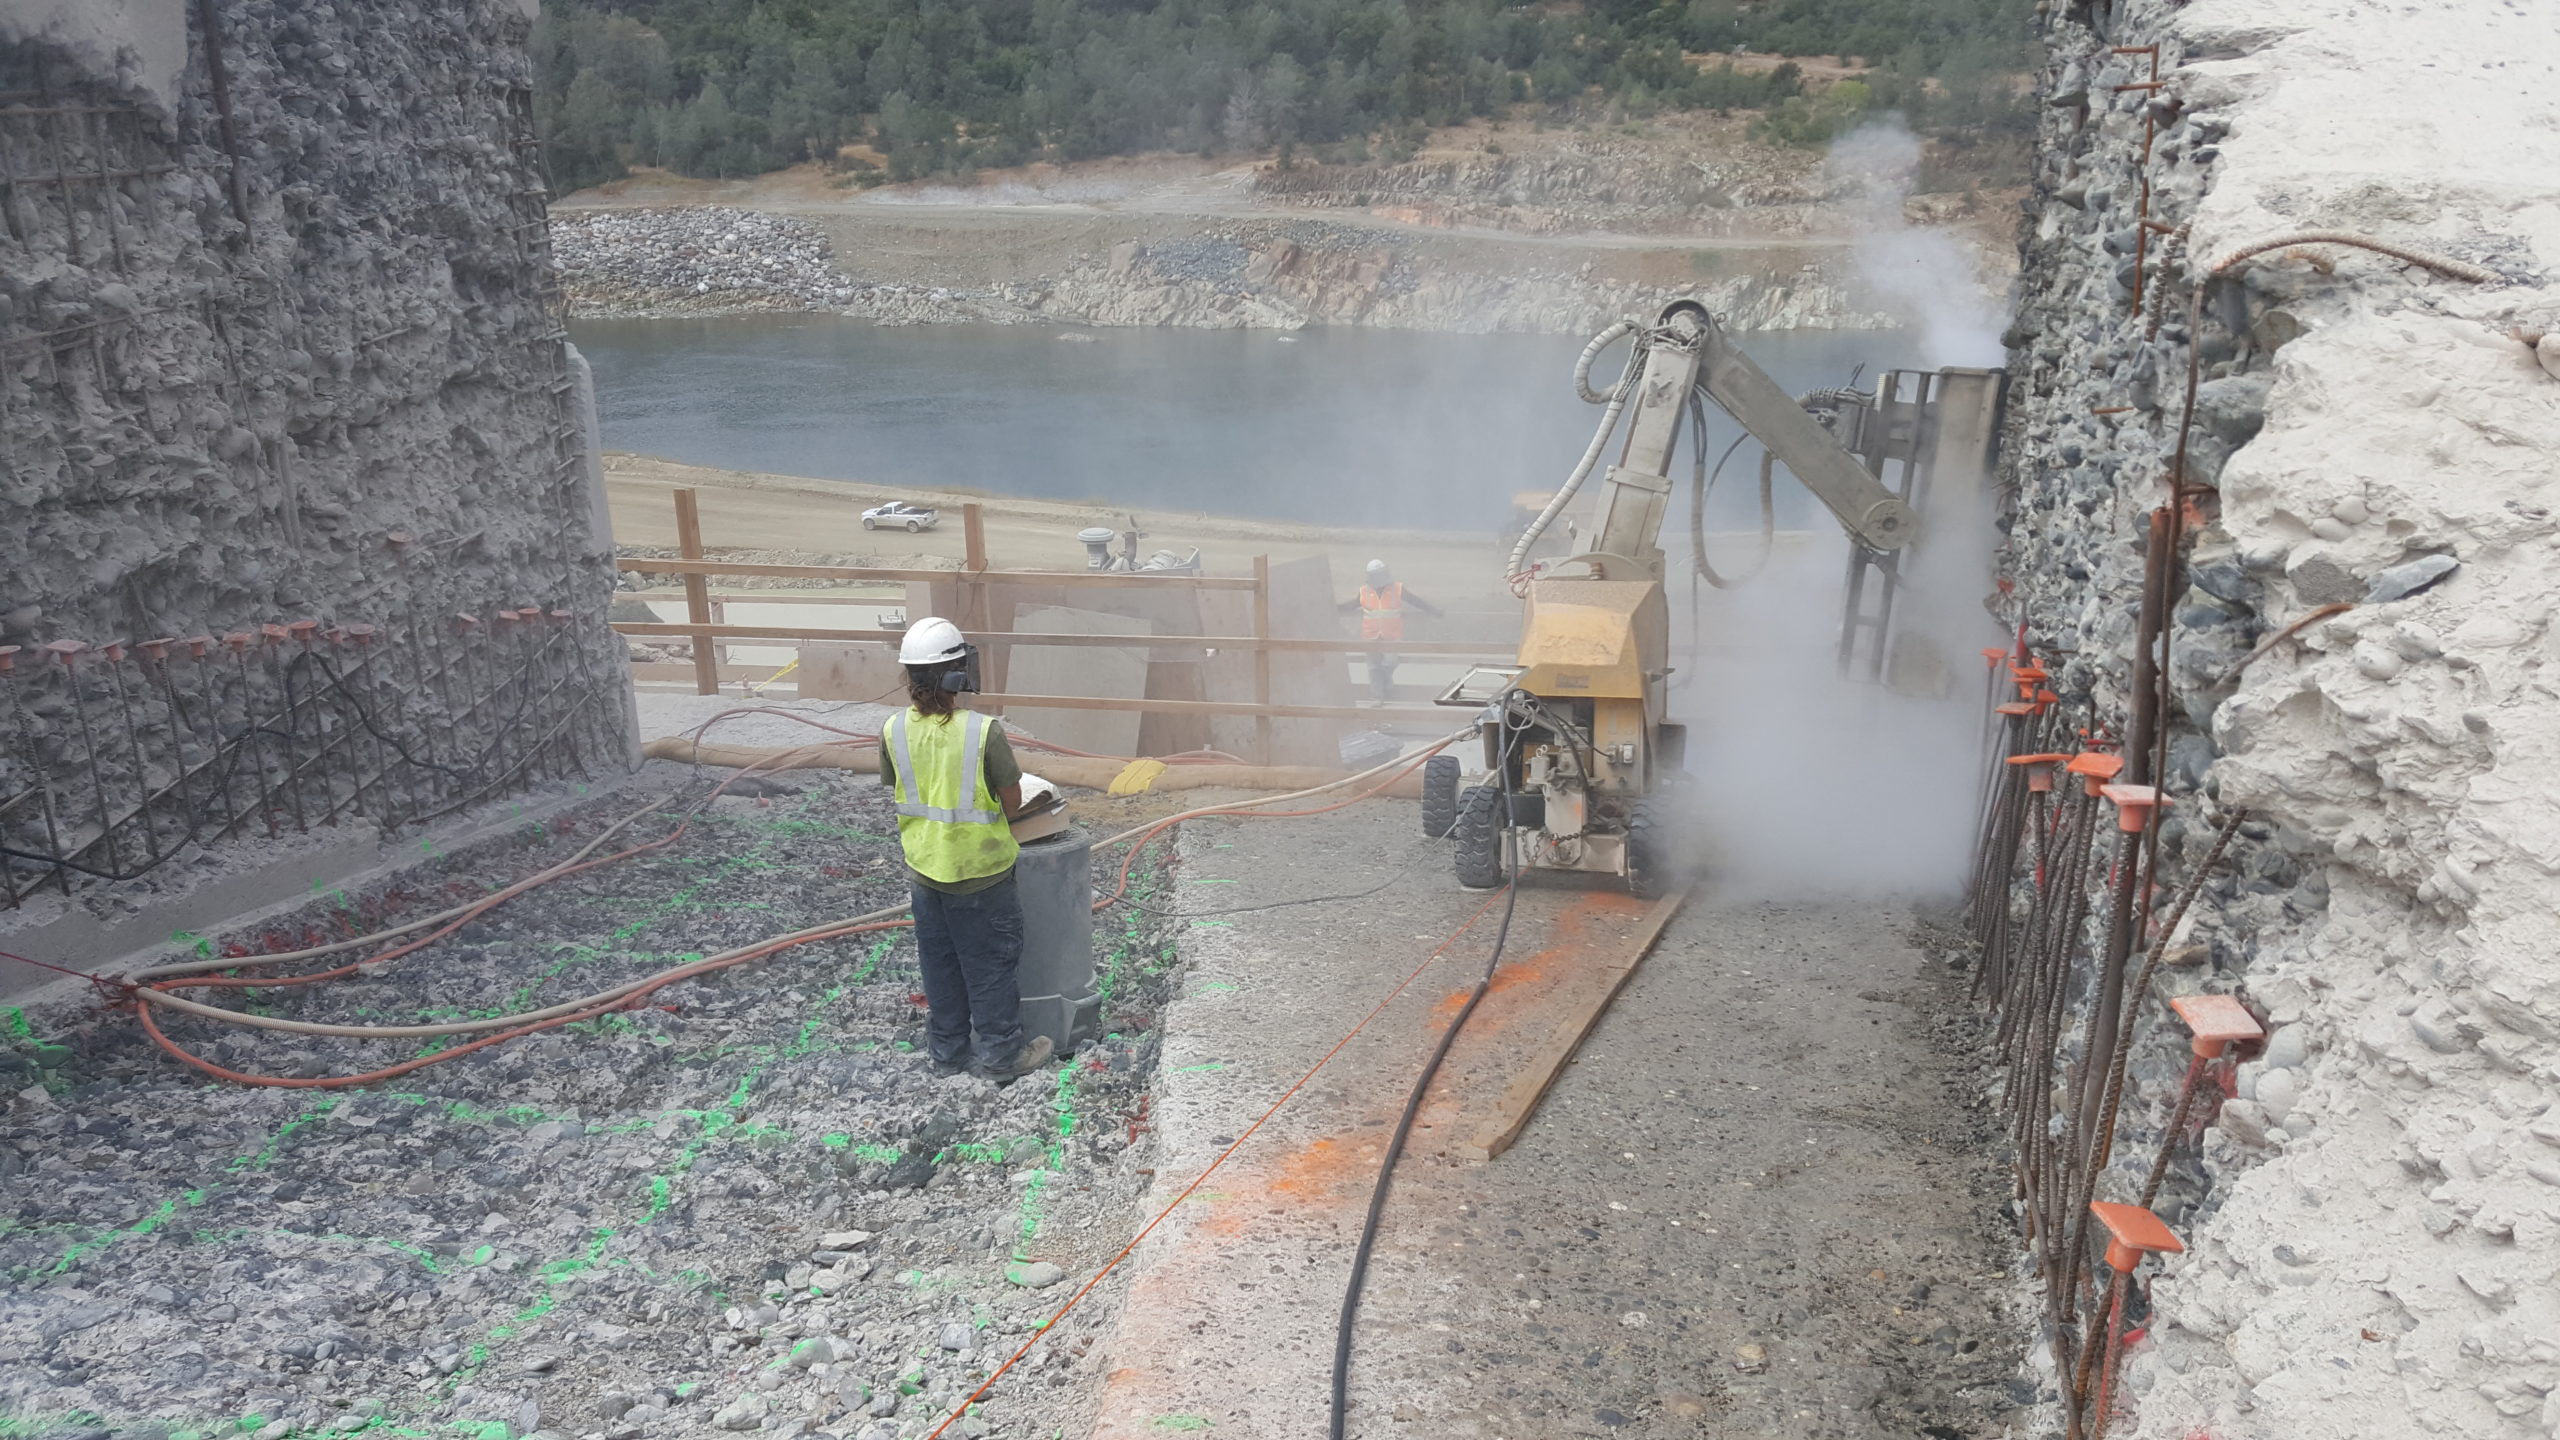 photo of Oroville Dam Emergency Spillway Repair Conjet project